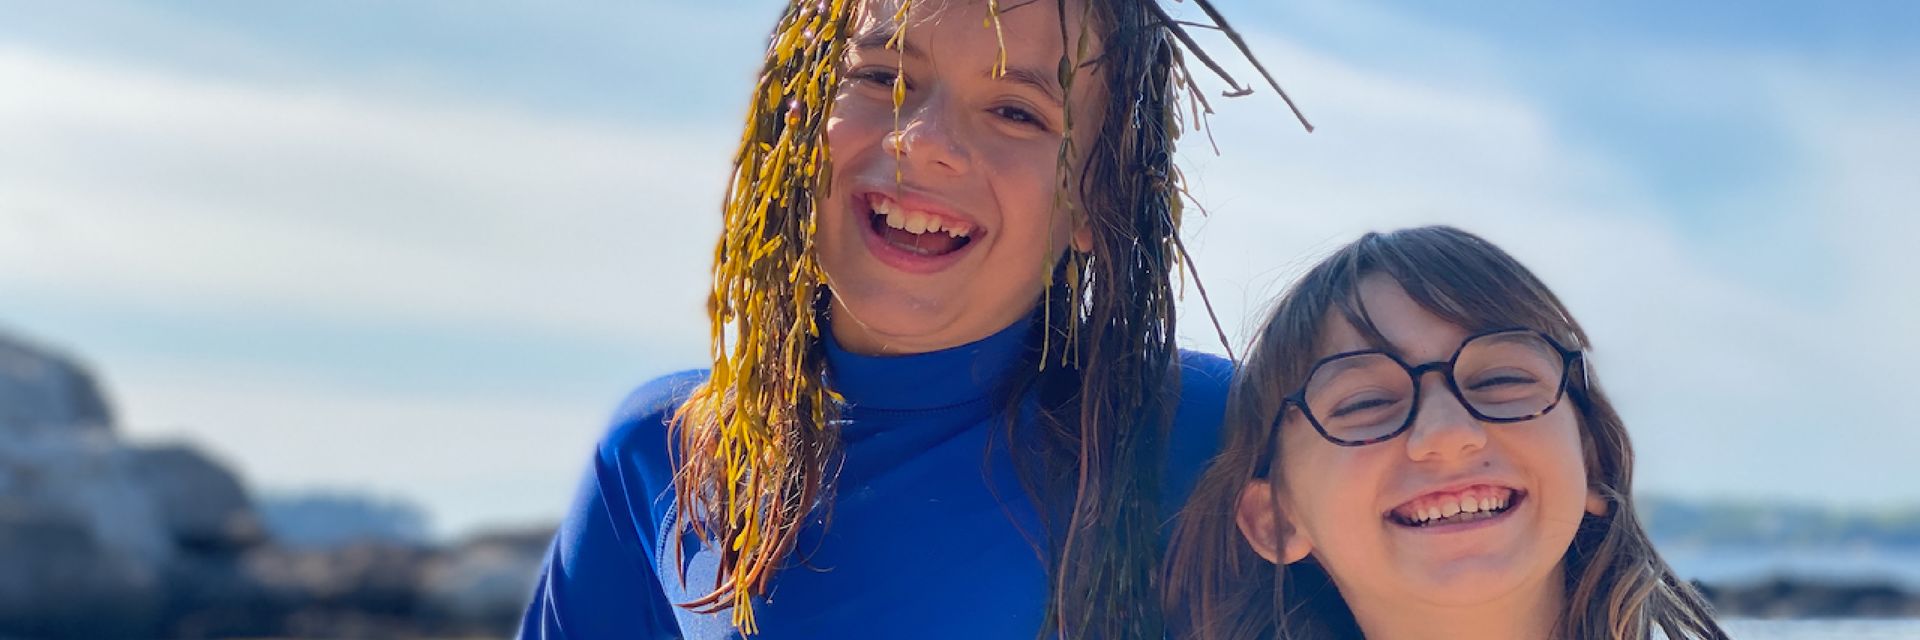 Image of two elementary aged children at the beach, side by side and smiling at the camera